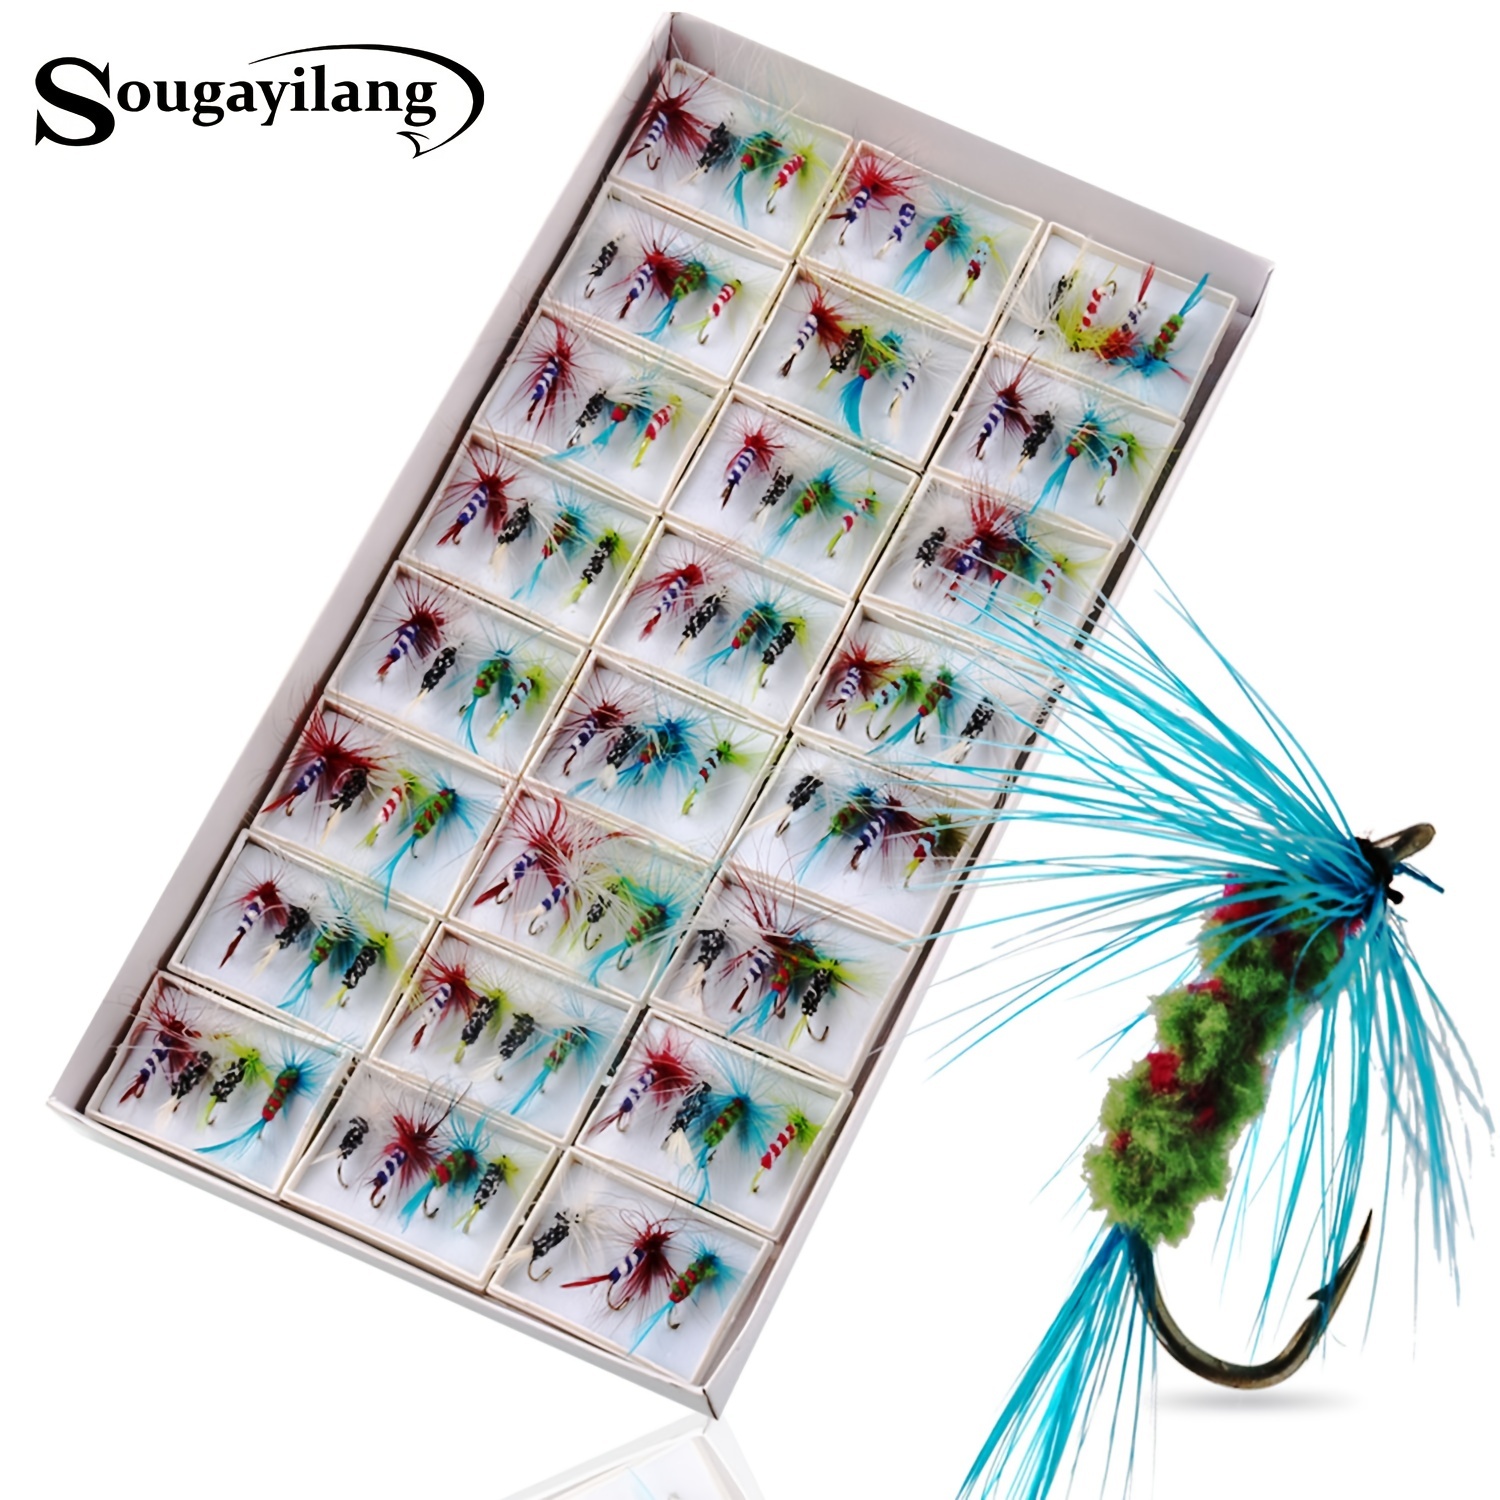 96pcs Sougayilang Fly Fishing Lures with Super Sharpened Crank Hook - High  Carbon Steel Bait for Catching Insects and Flies